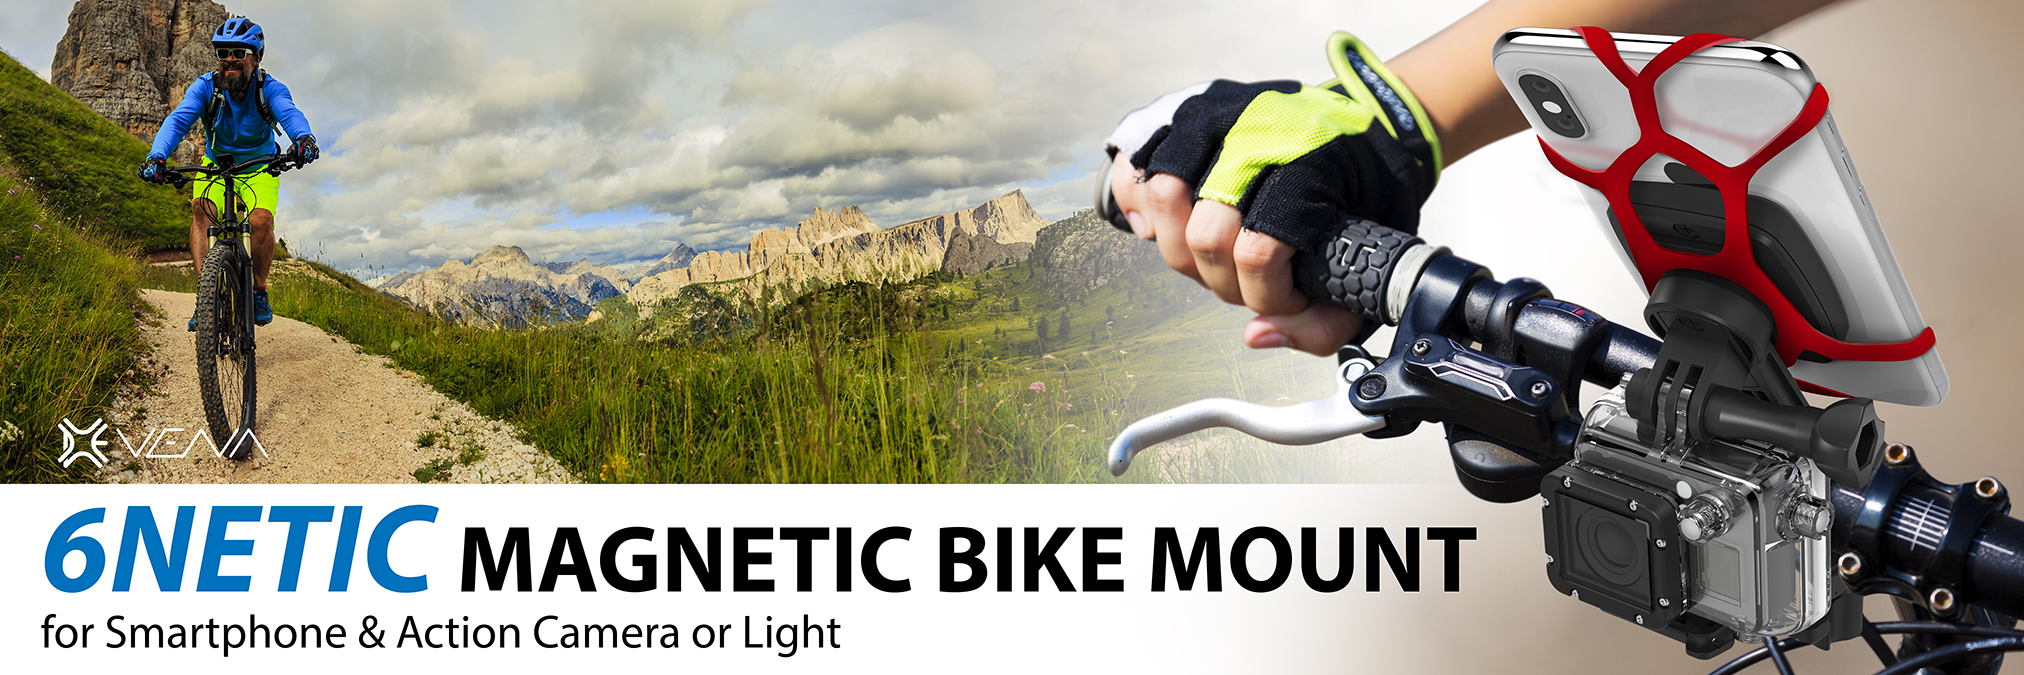 The 6Netic Magnetic Bike Smartphone Mount is great for an action camera or a bike light.